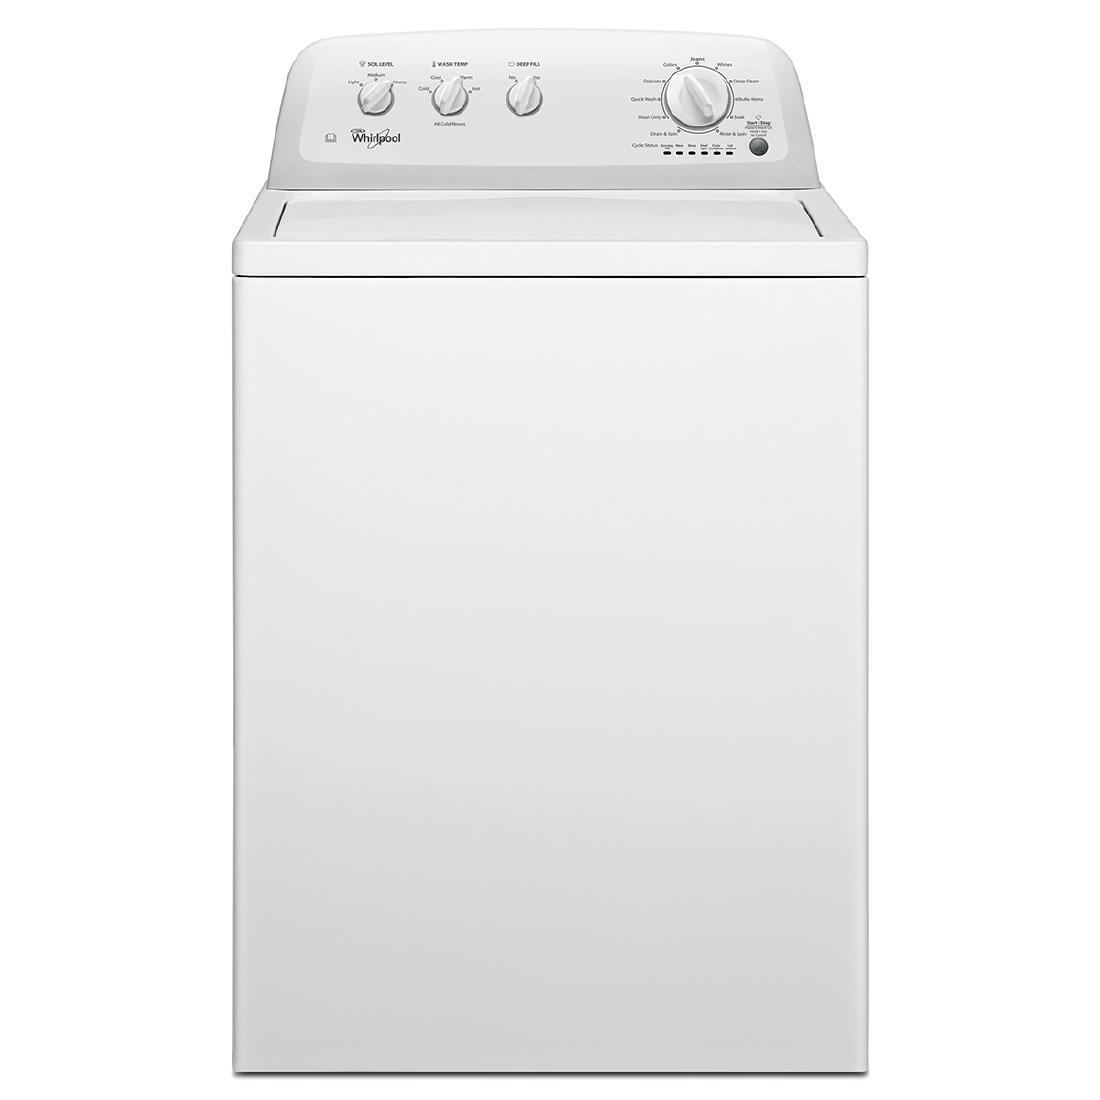 Whirlpool American Style Top Loading Commercial Washing Machine 15kg 3LWTW4705FW - HC591  - 1